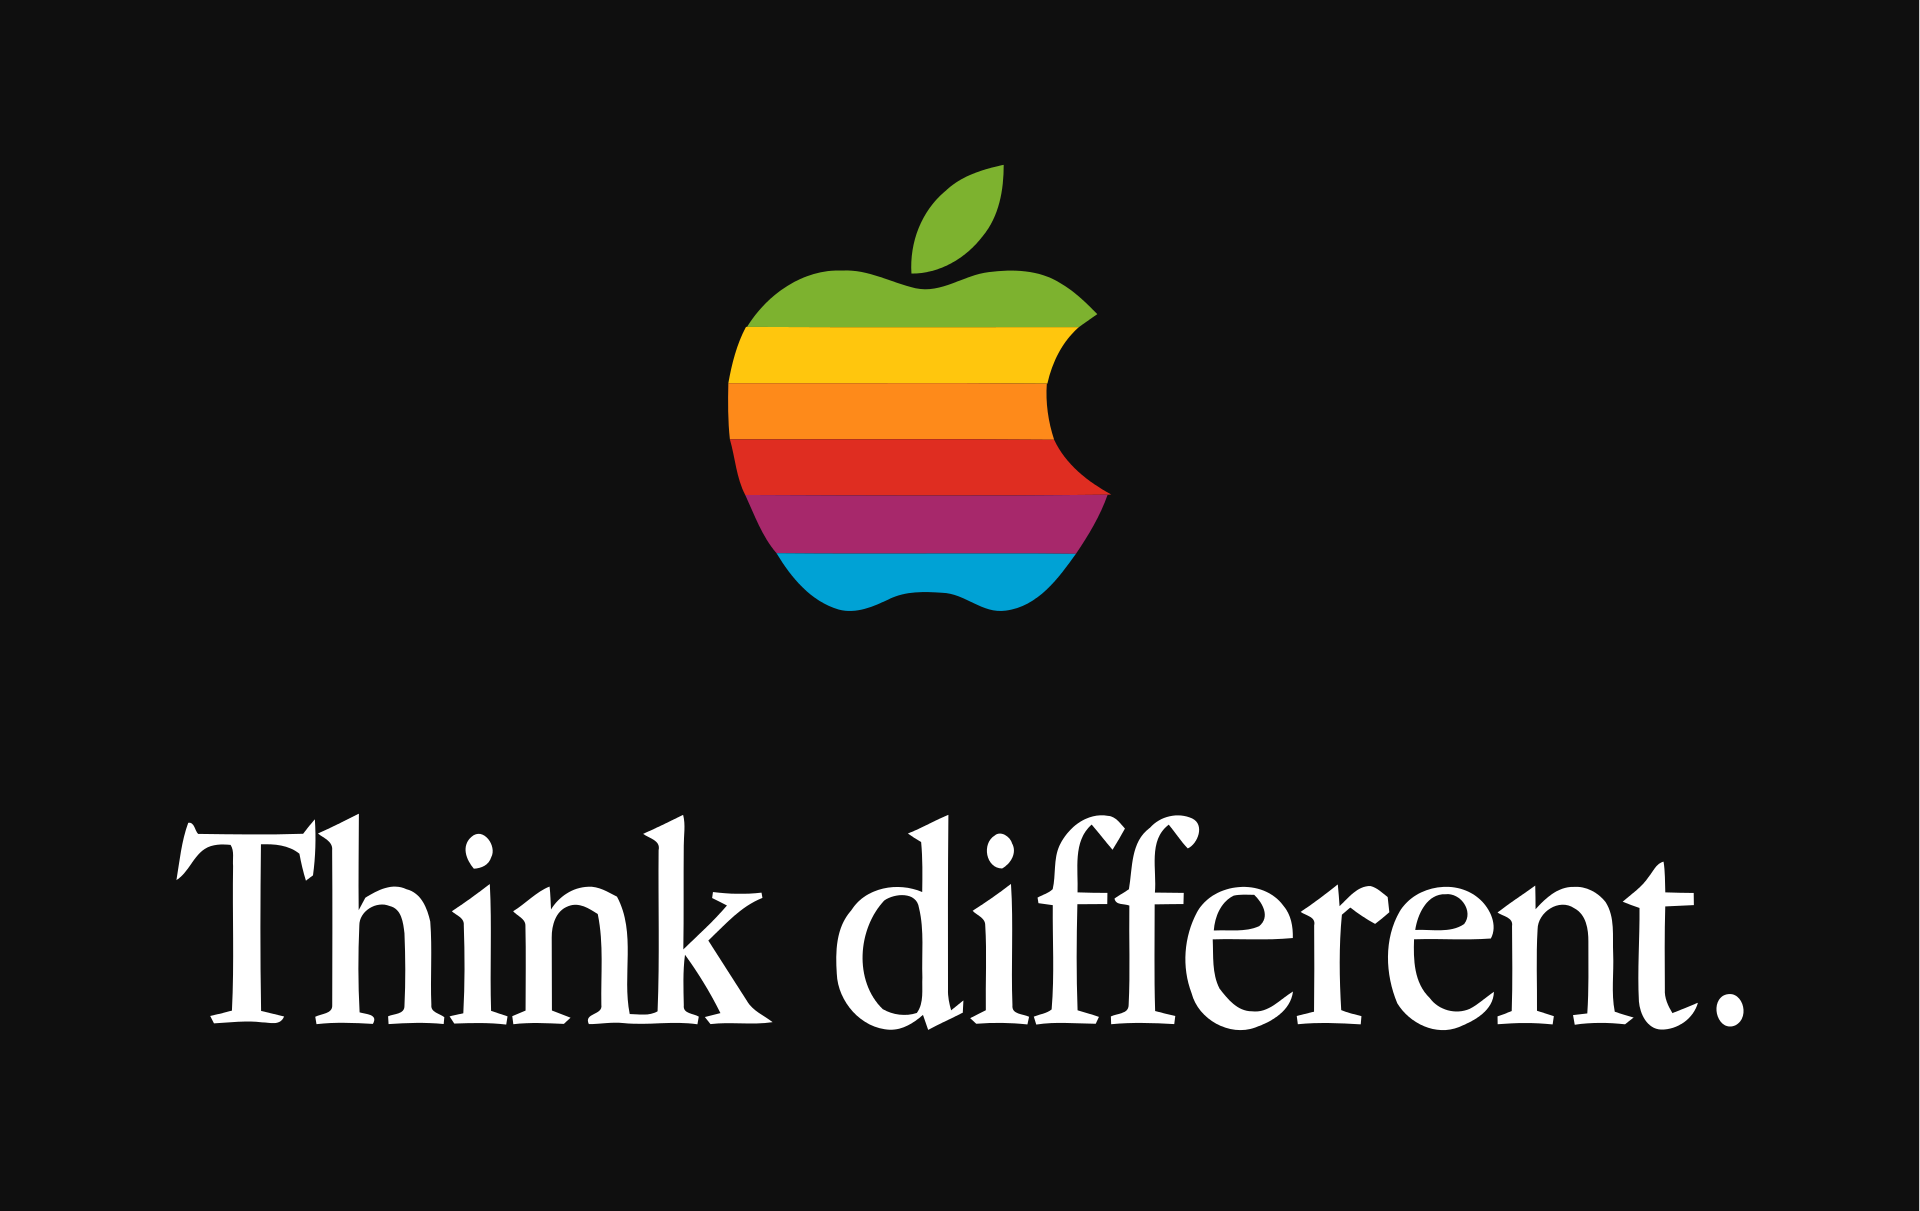 Apple Logo - Think Different Campaign